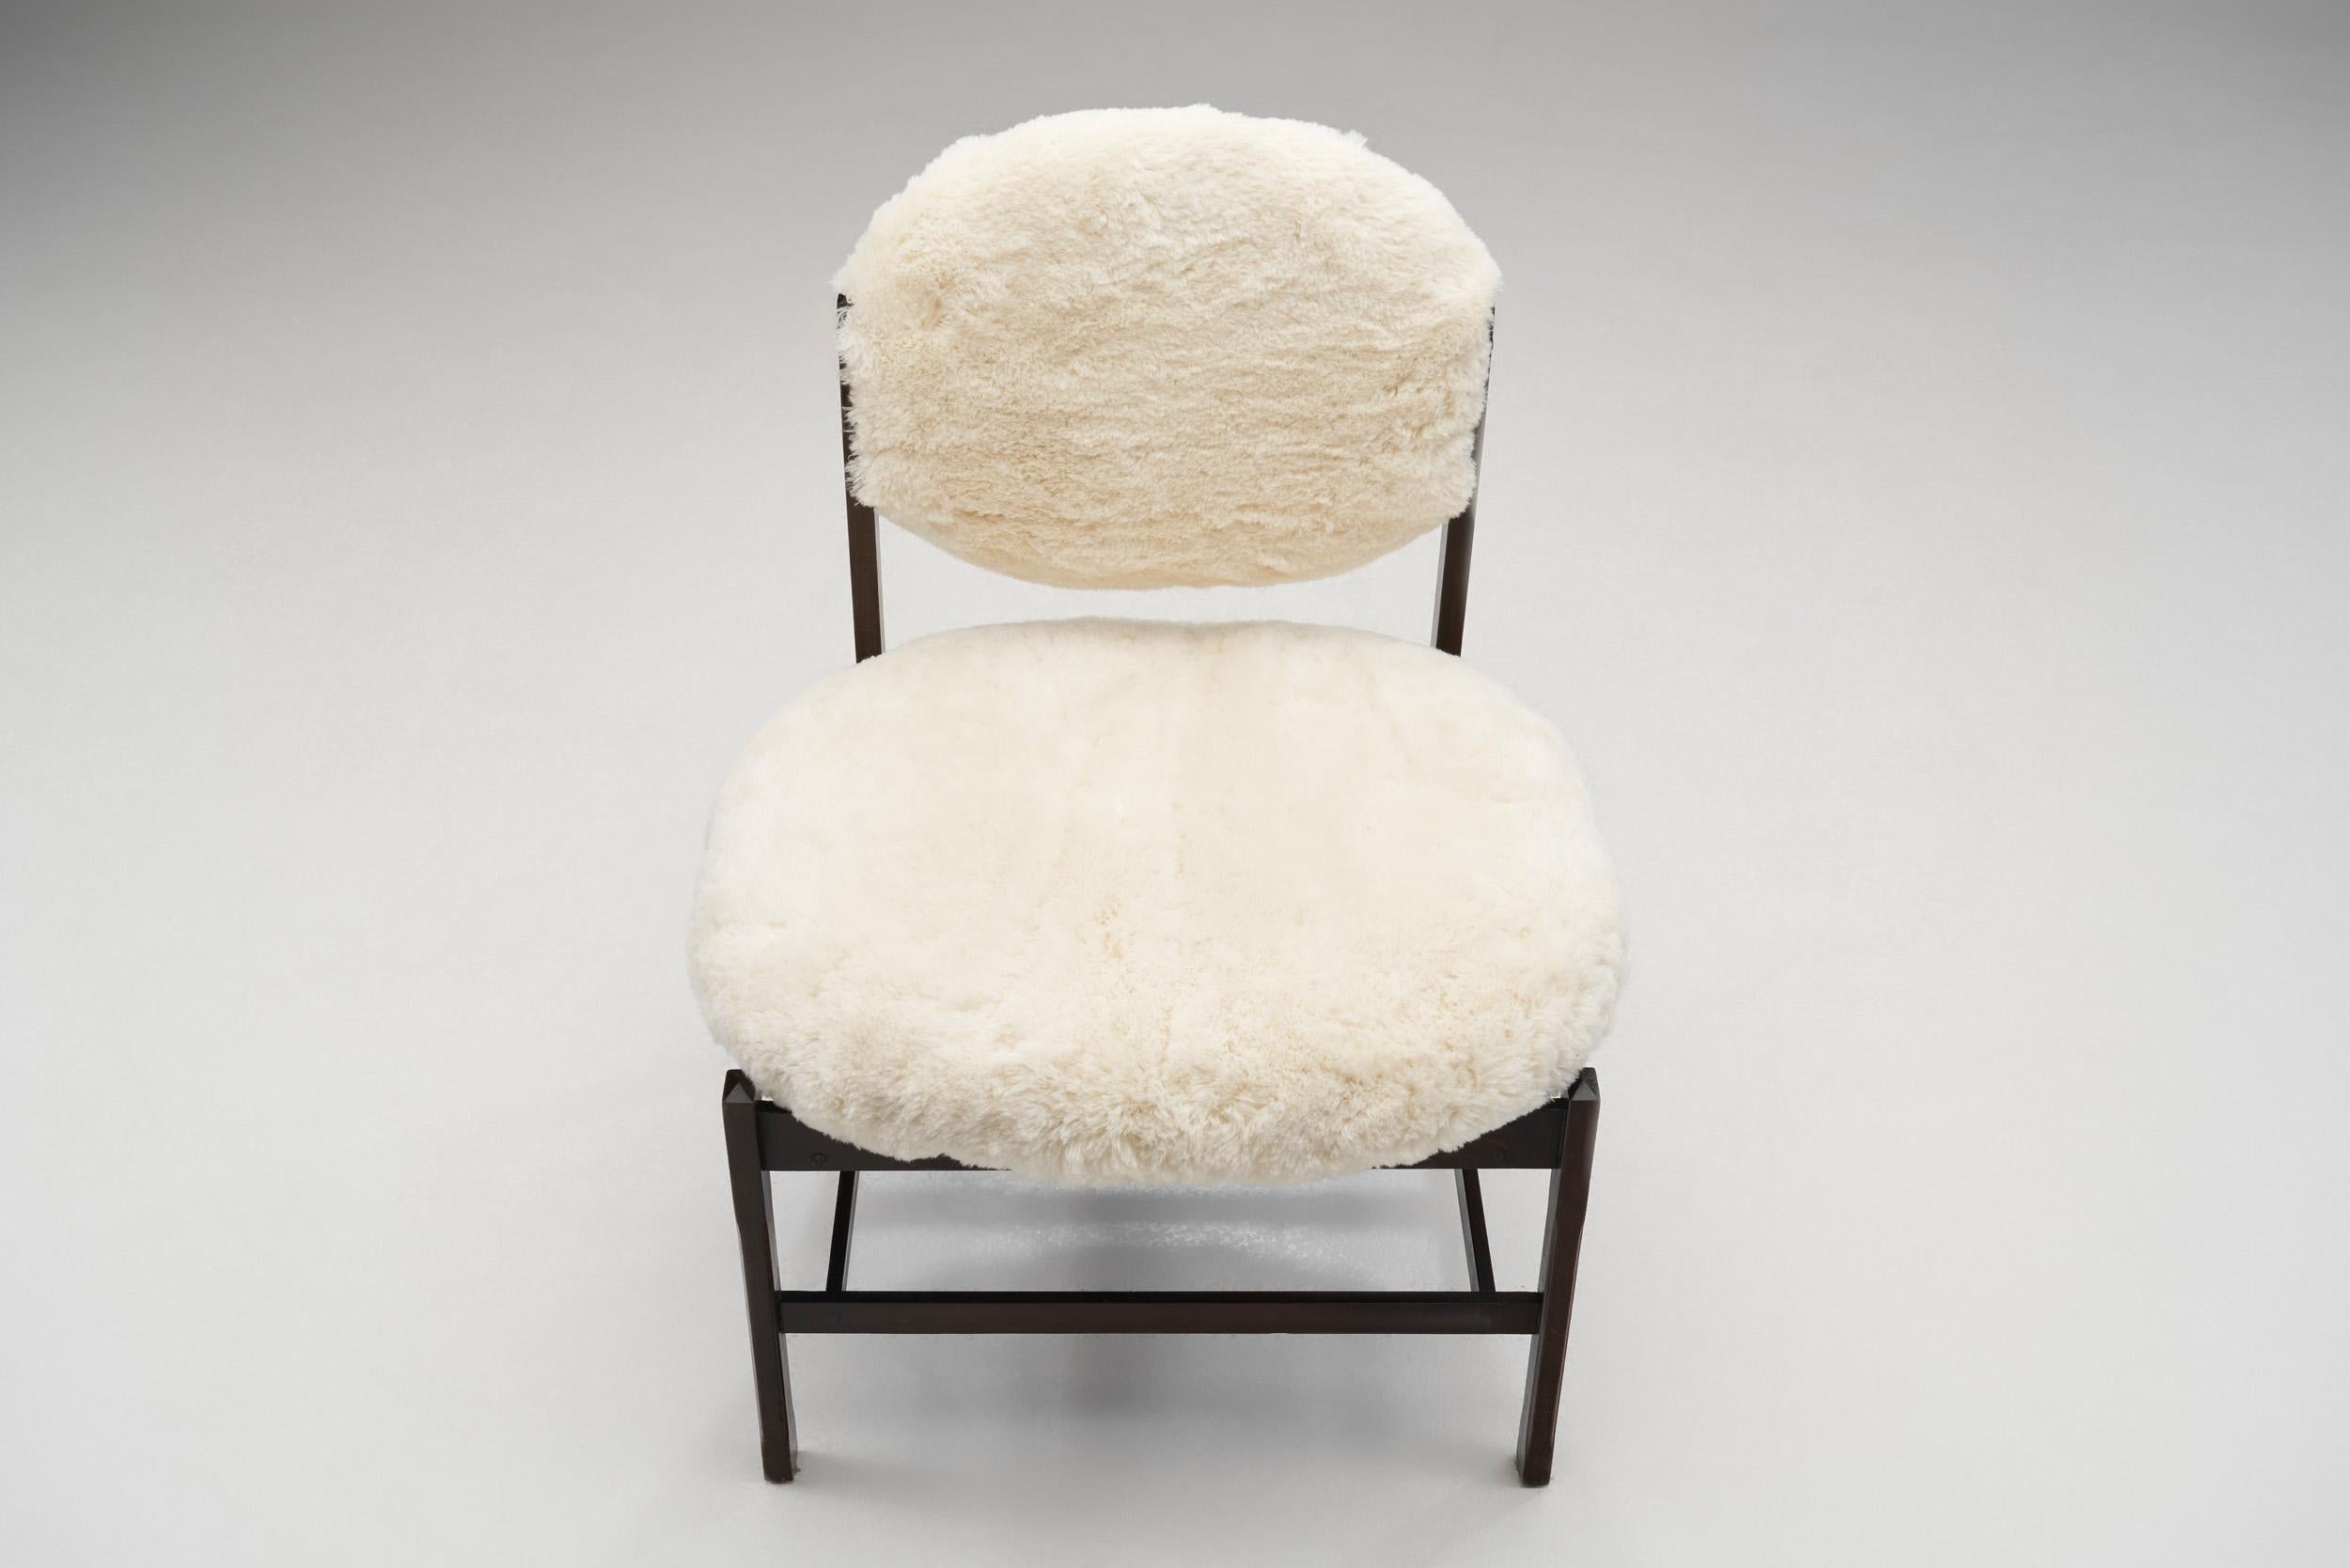 Wood European Easy Chairs Upholstered in Wool, Europe ca 1950s For Sale